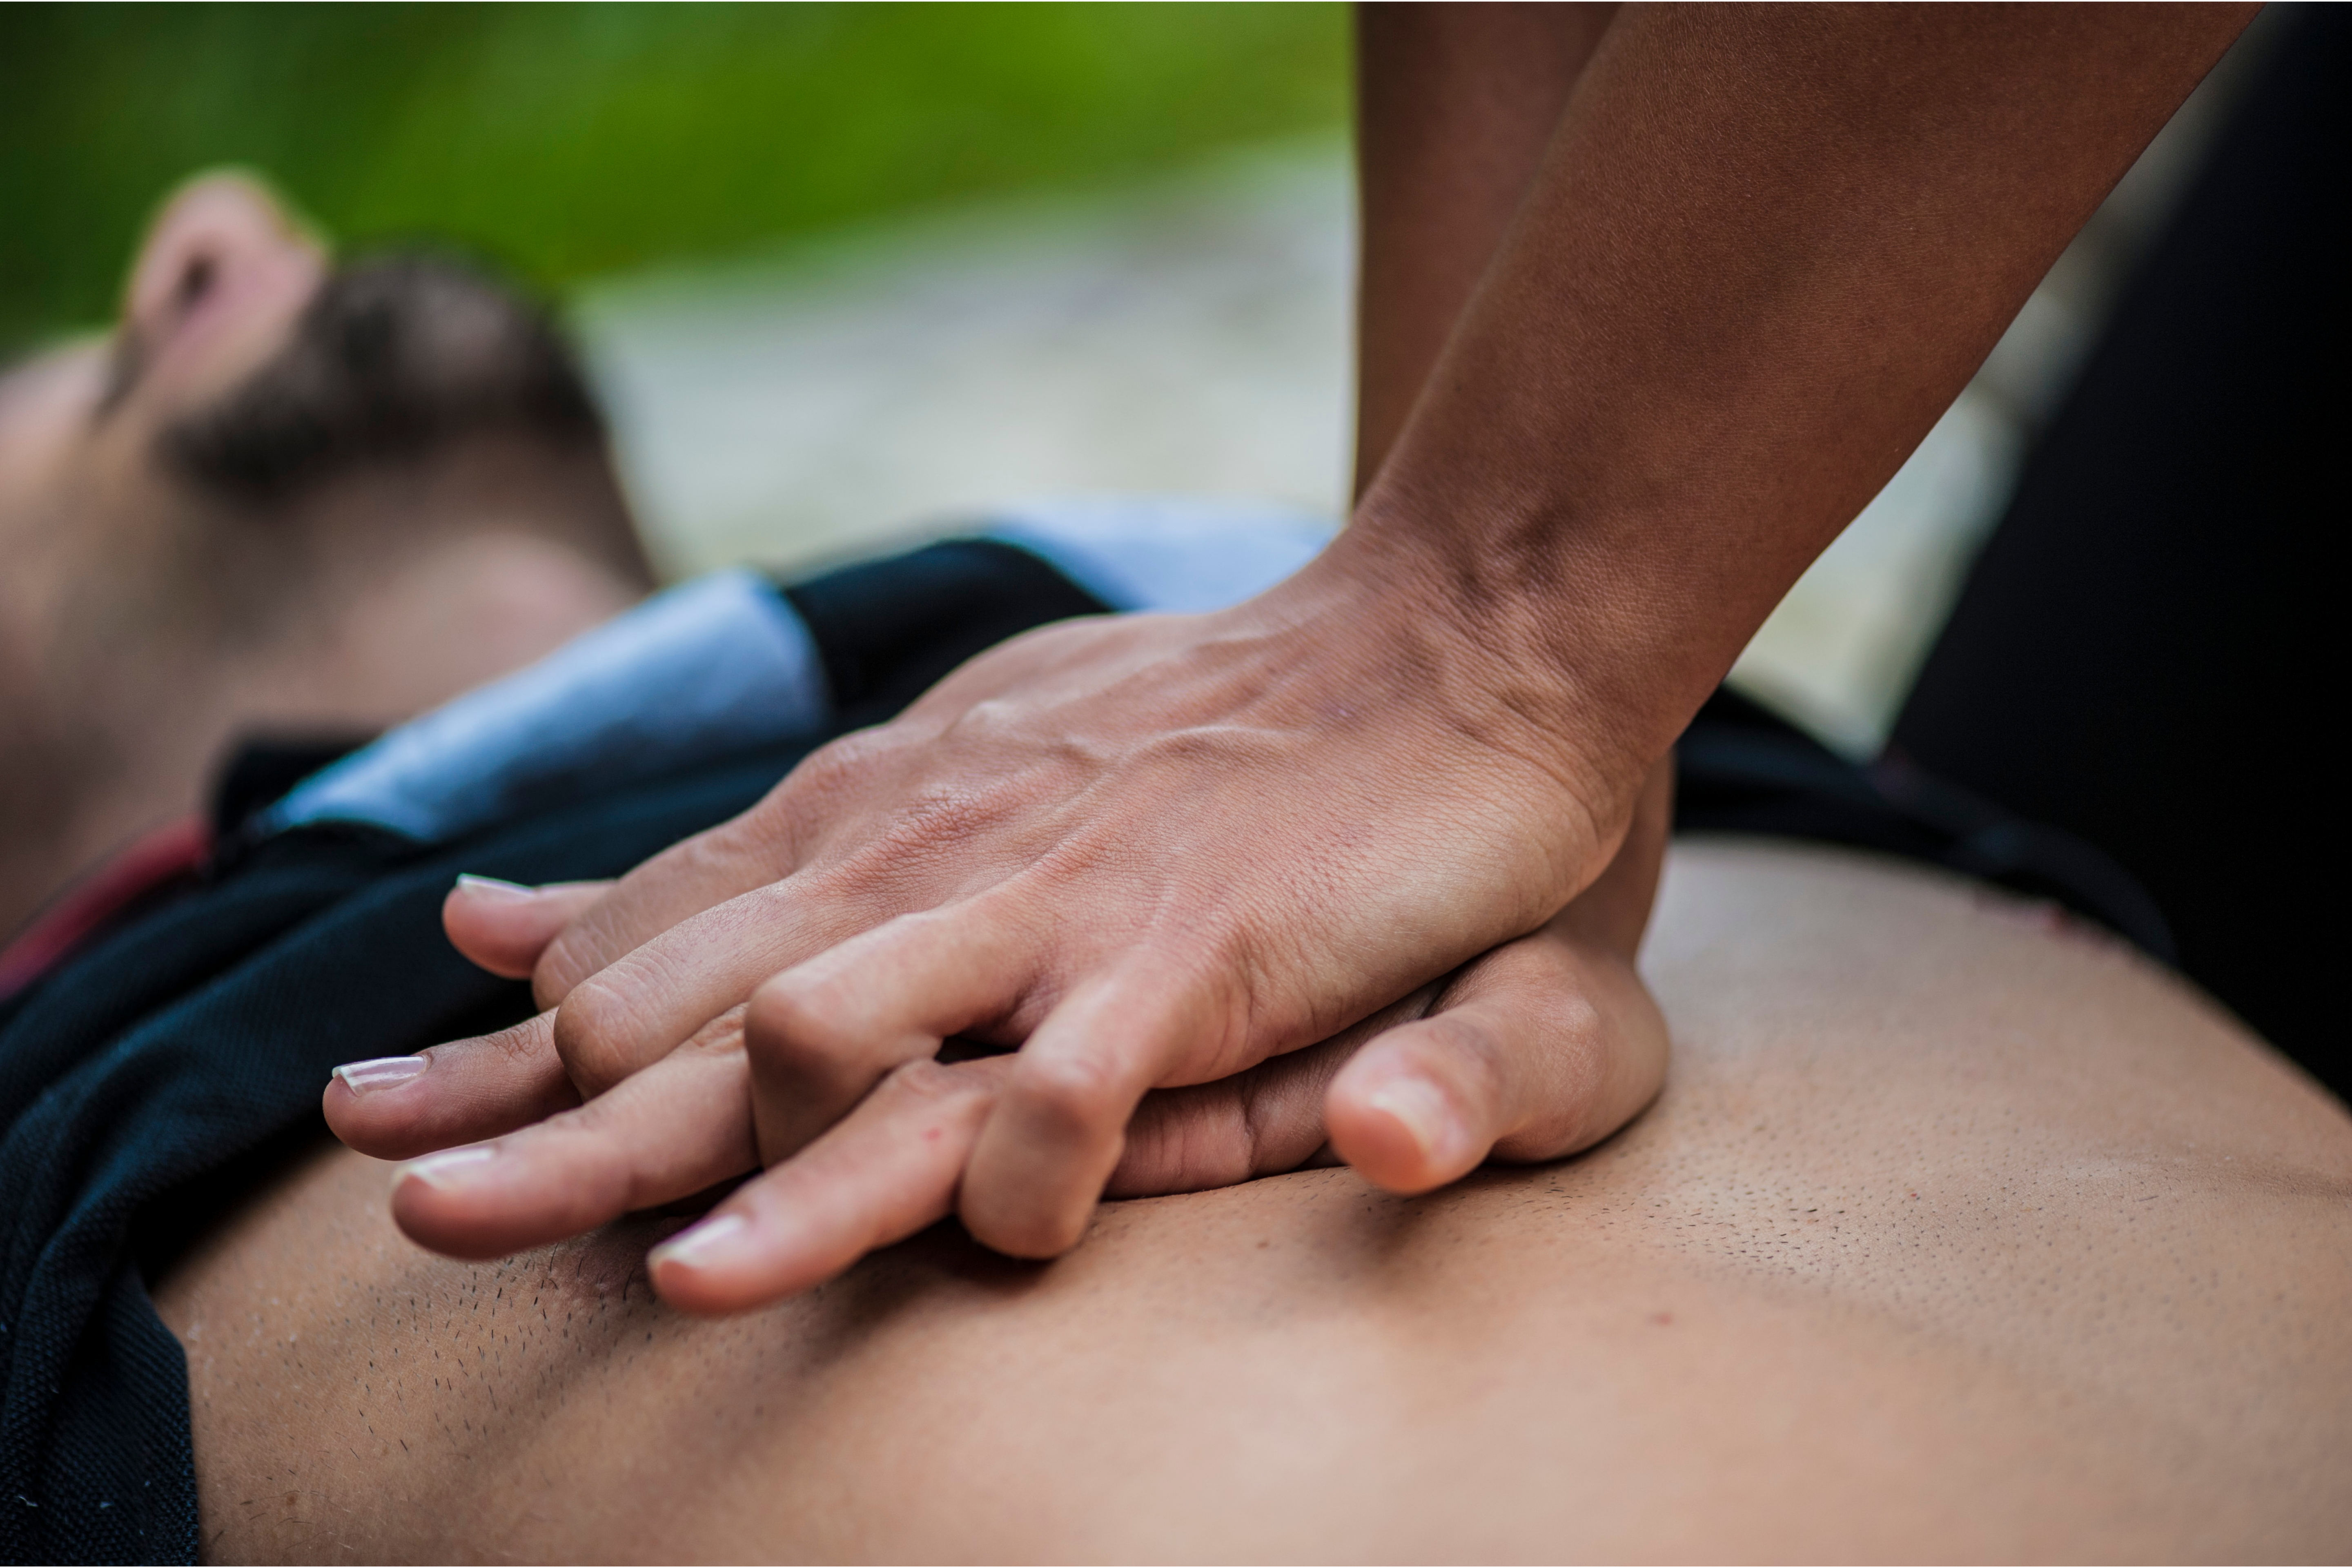 What You Need to Know About CPR